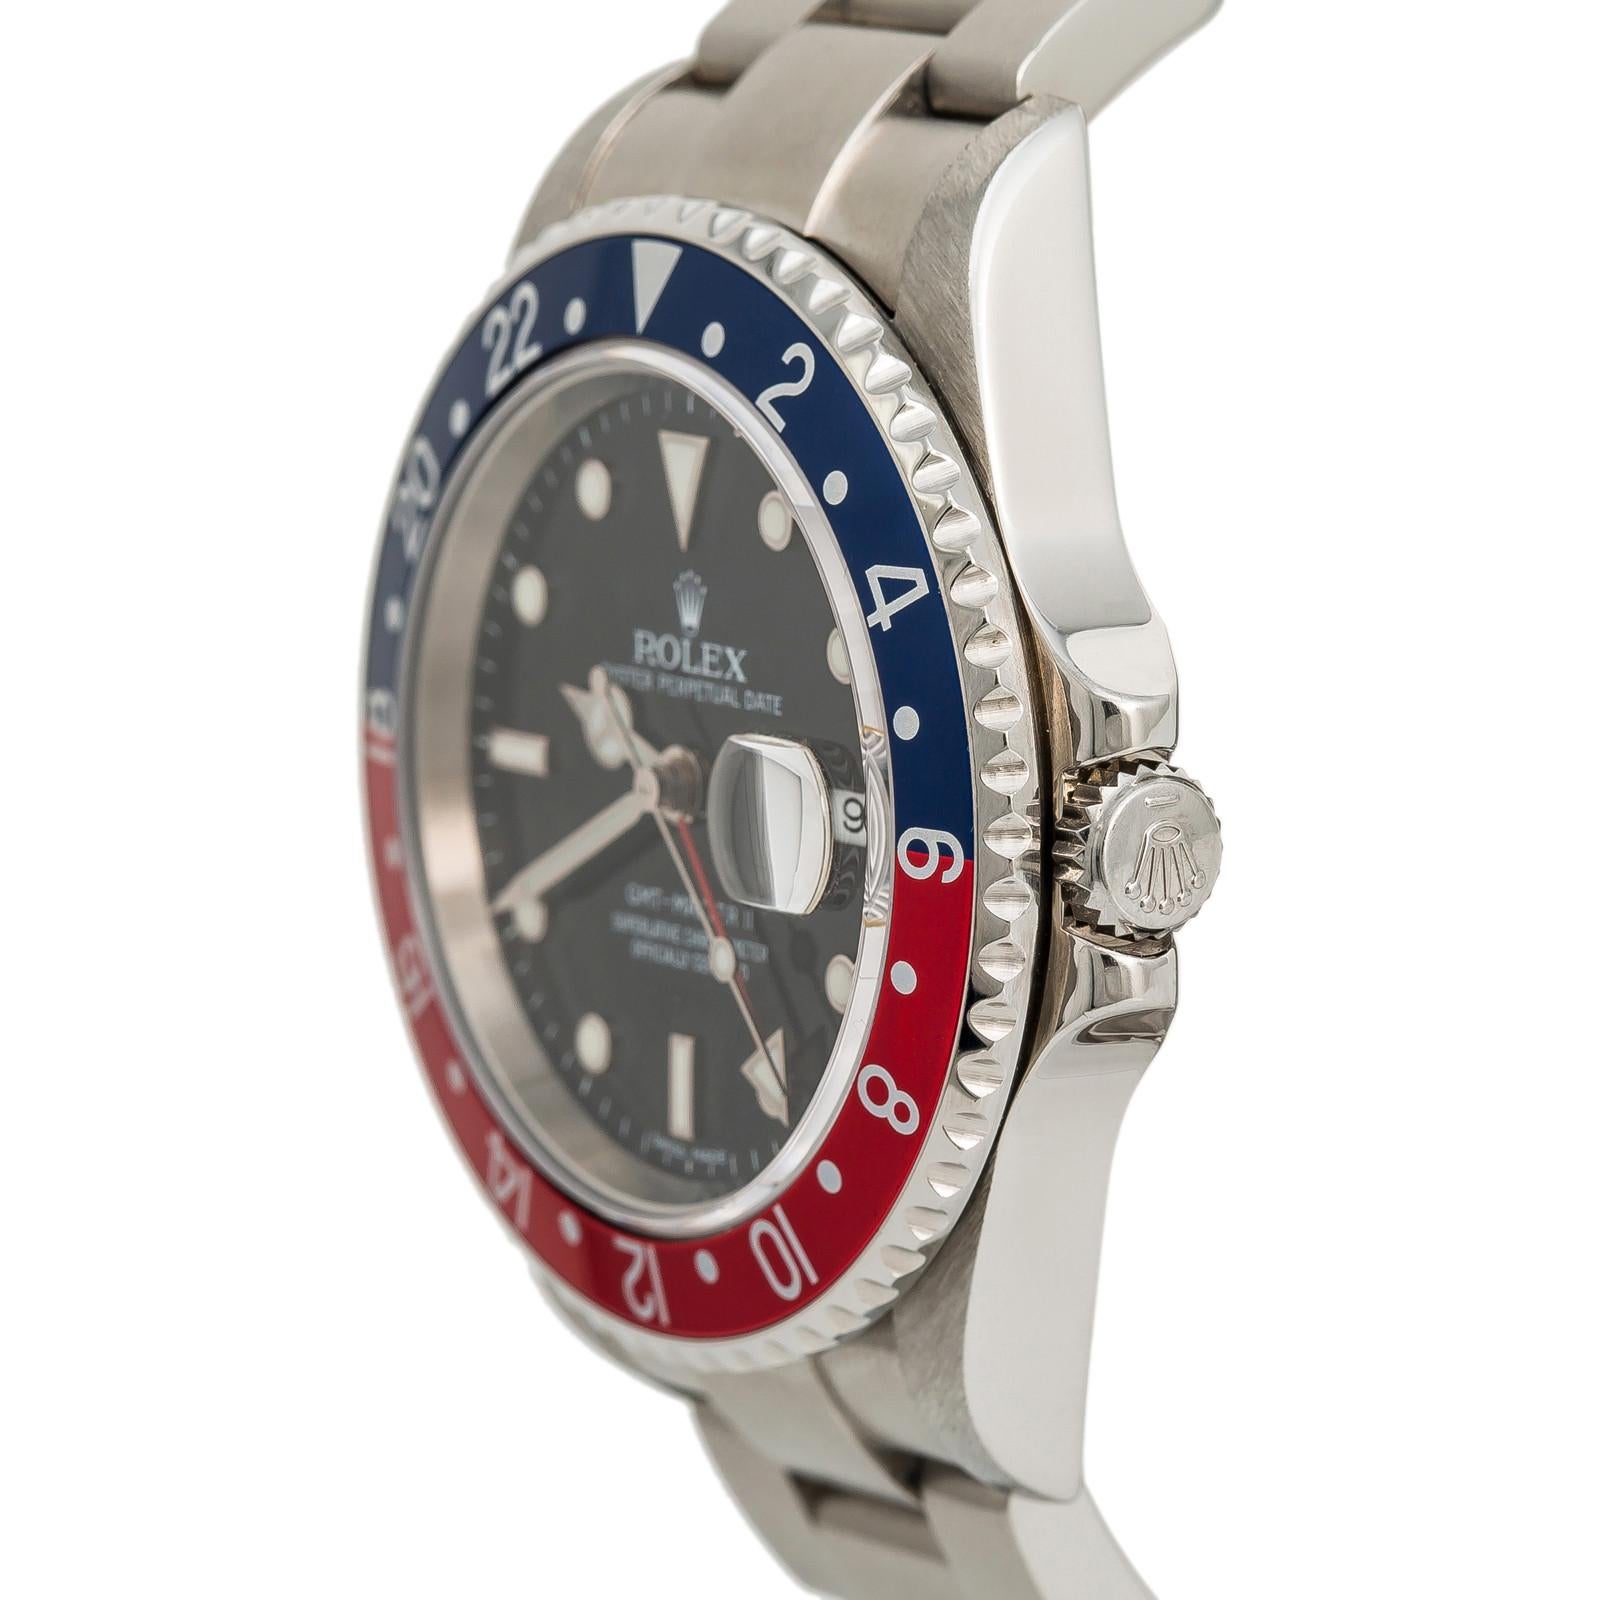 Rolex GMT Master II13800, Dial Certified Authentic For Sale 1